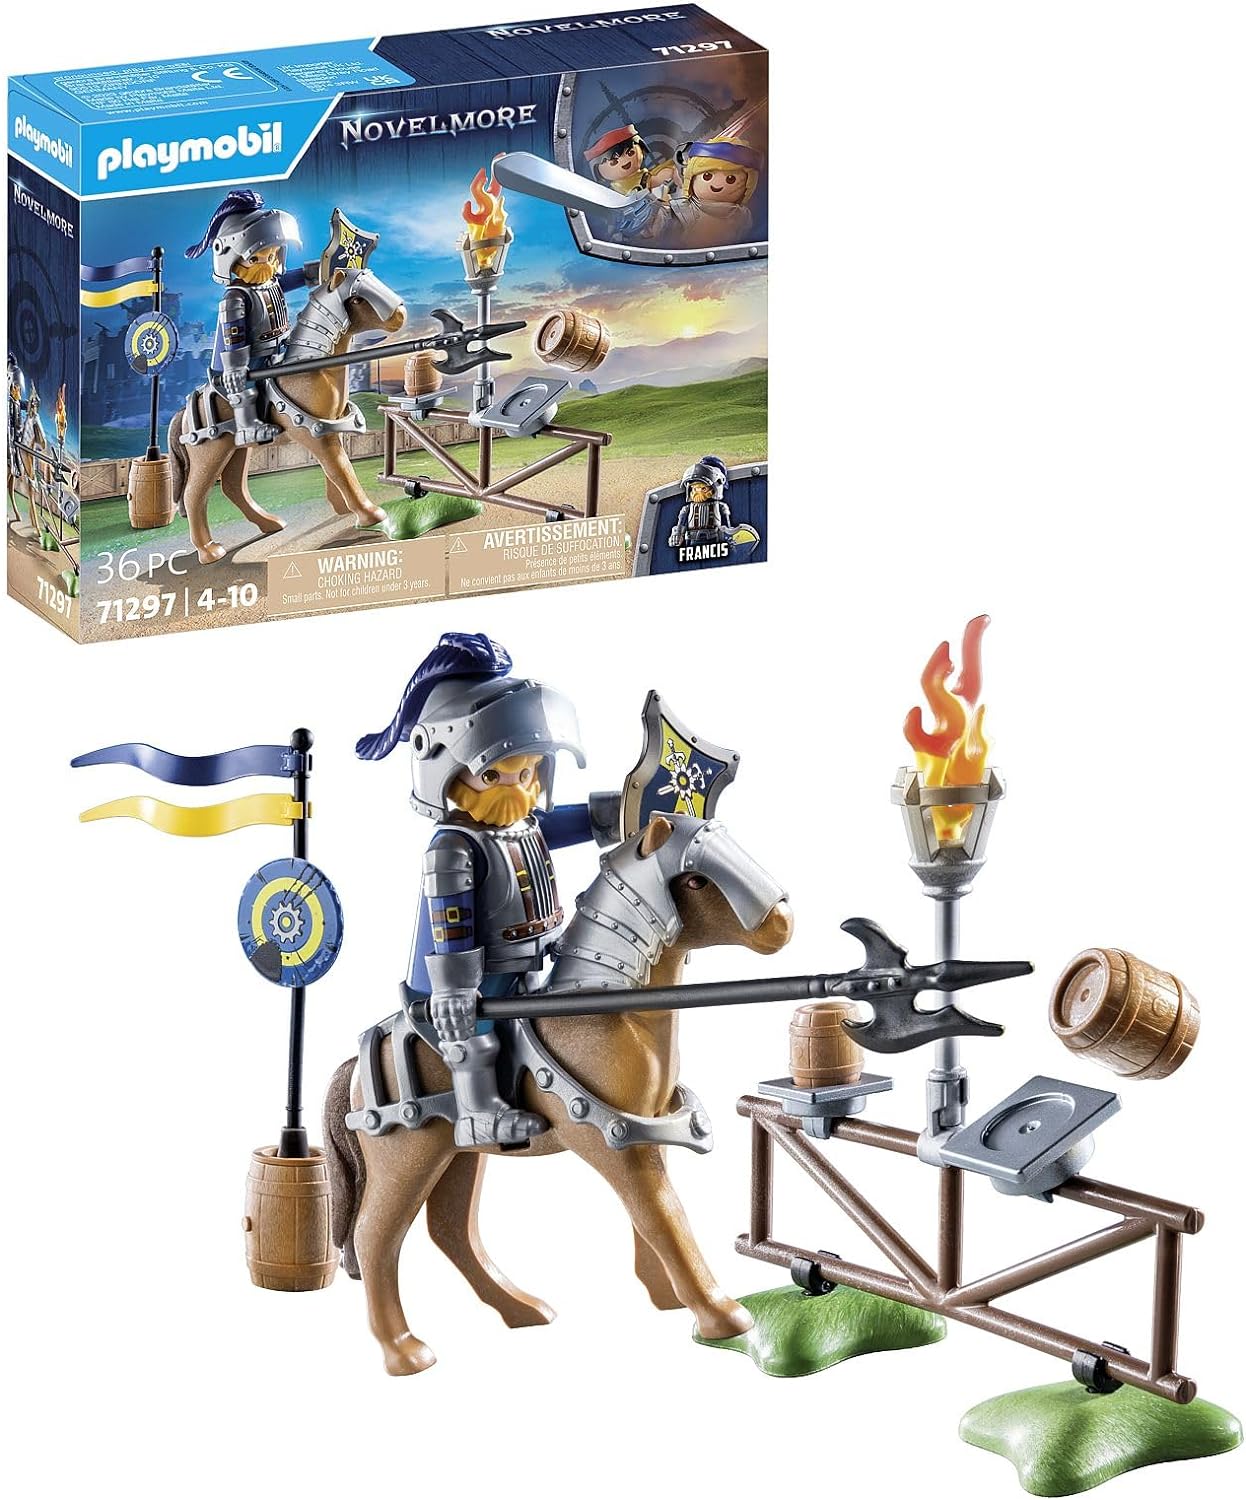 PLAYMOBIL Novelmore 71297 Novelmore Exercise Area, Exciting Knight Training on the Practice Area with Horse, Lance, Barrel and Target, Toy for Children from 4 Years